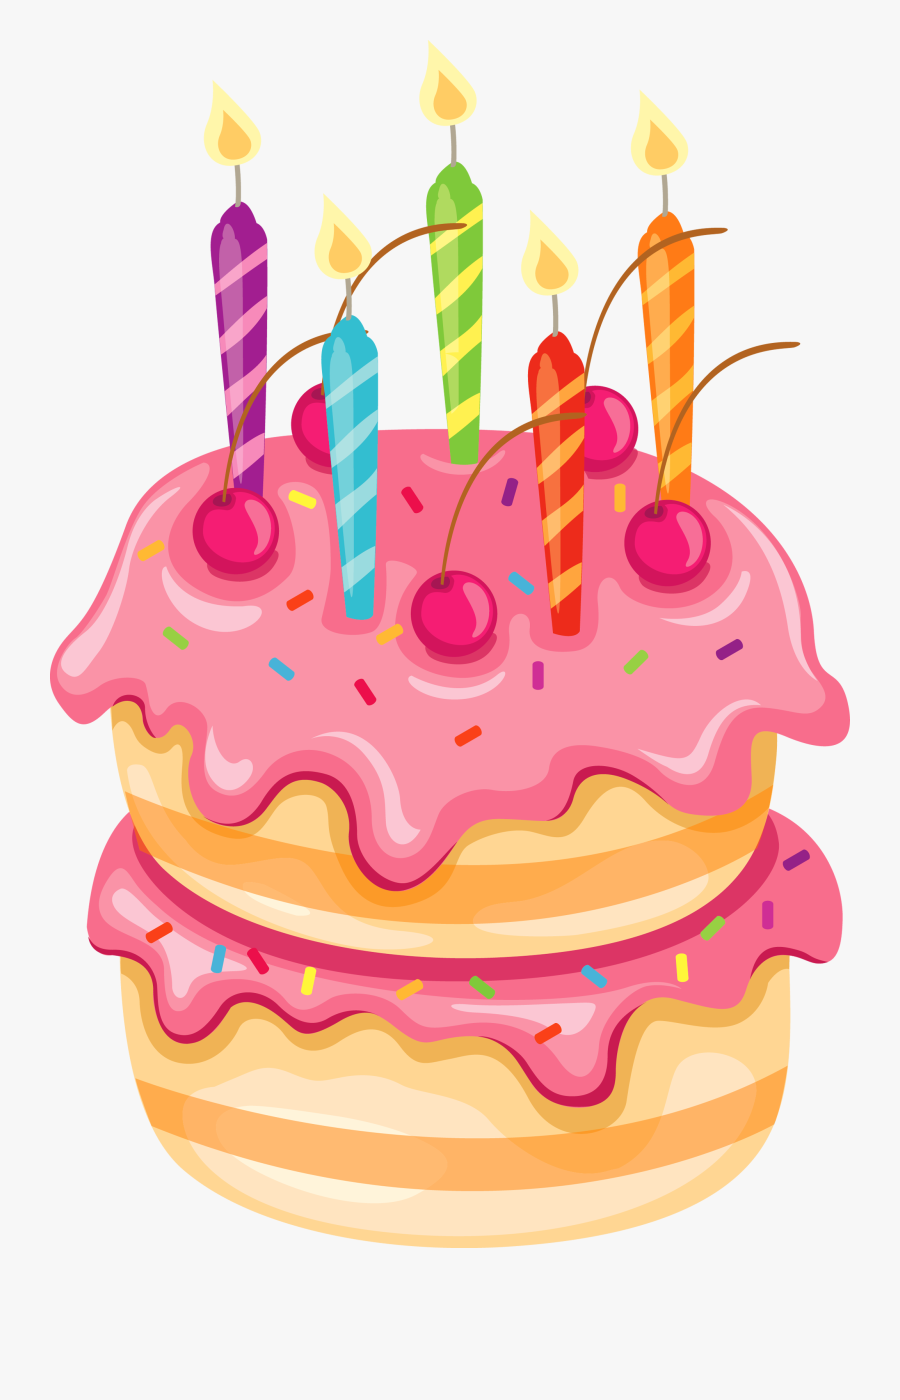 Cake And Candles Png, Transparent Clipart